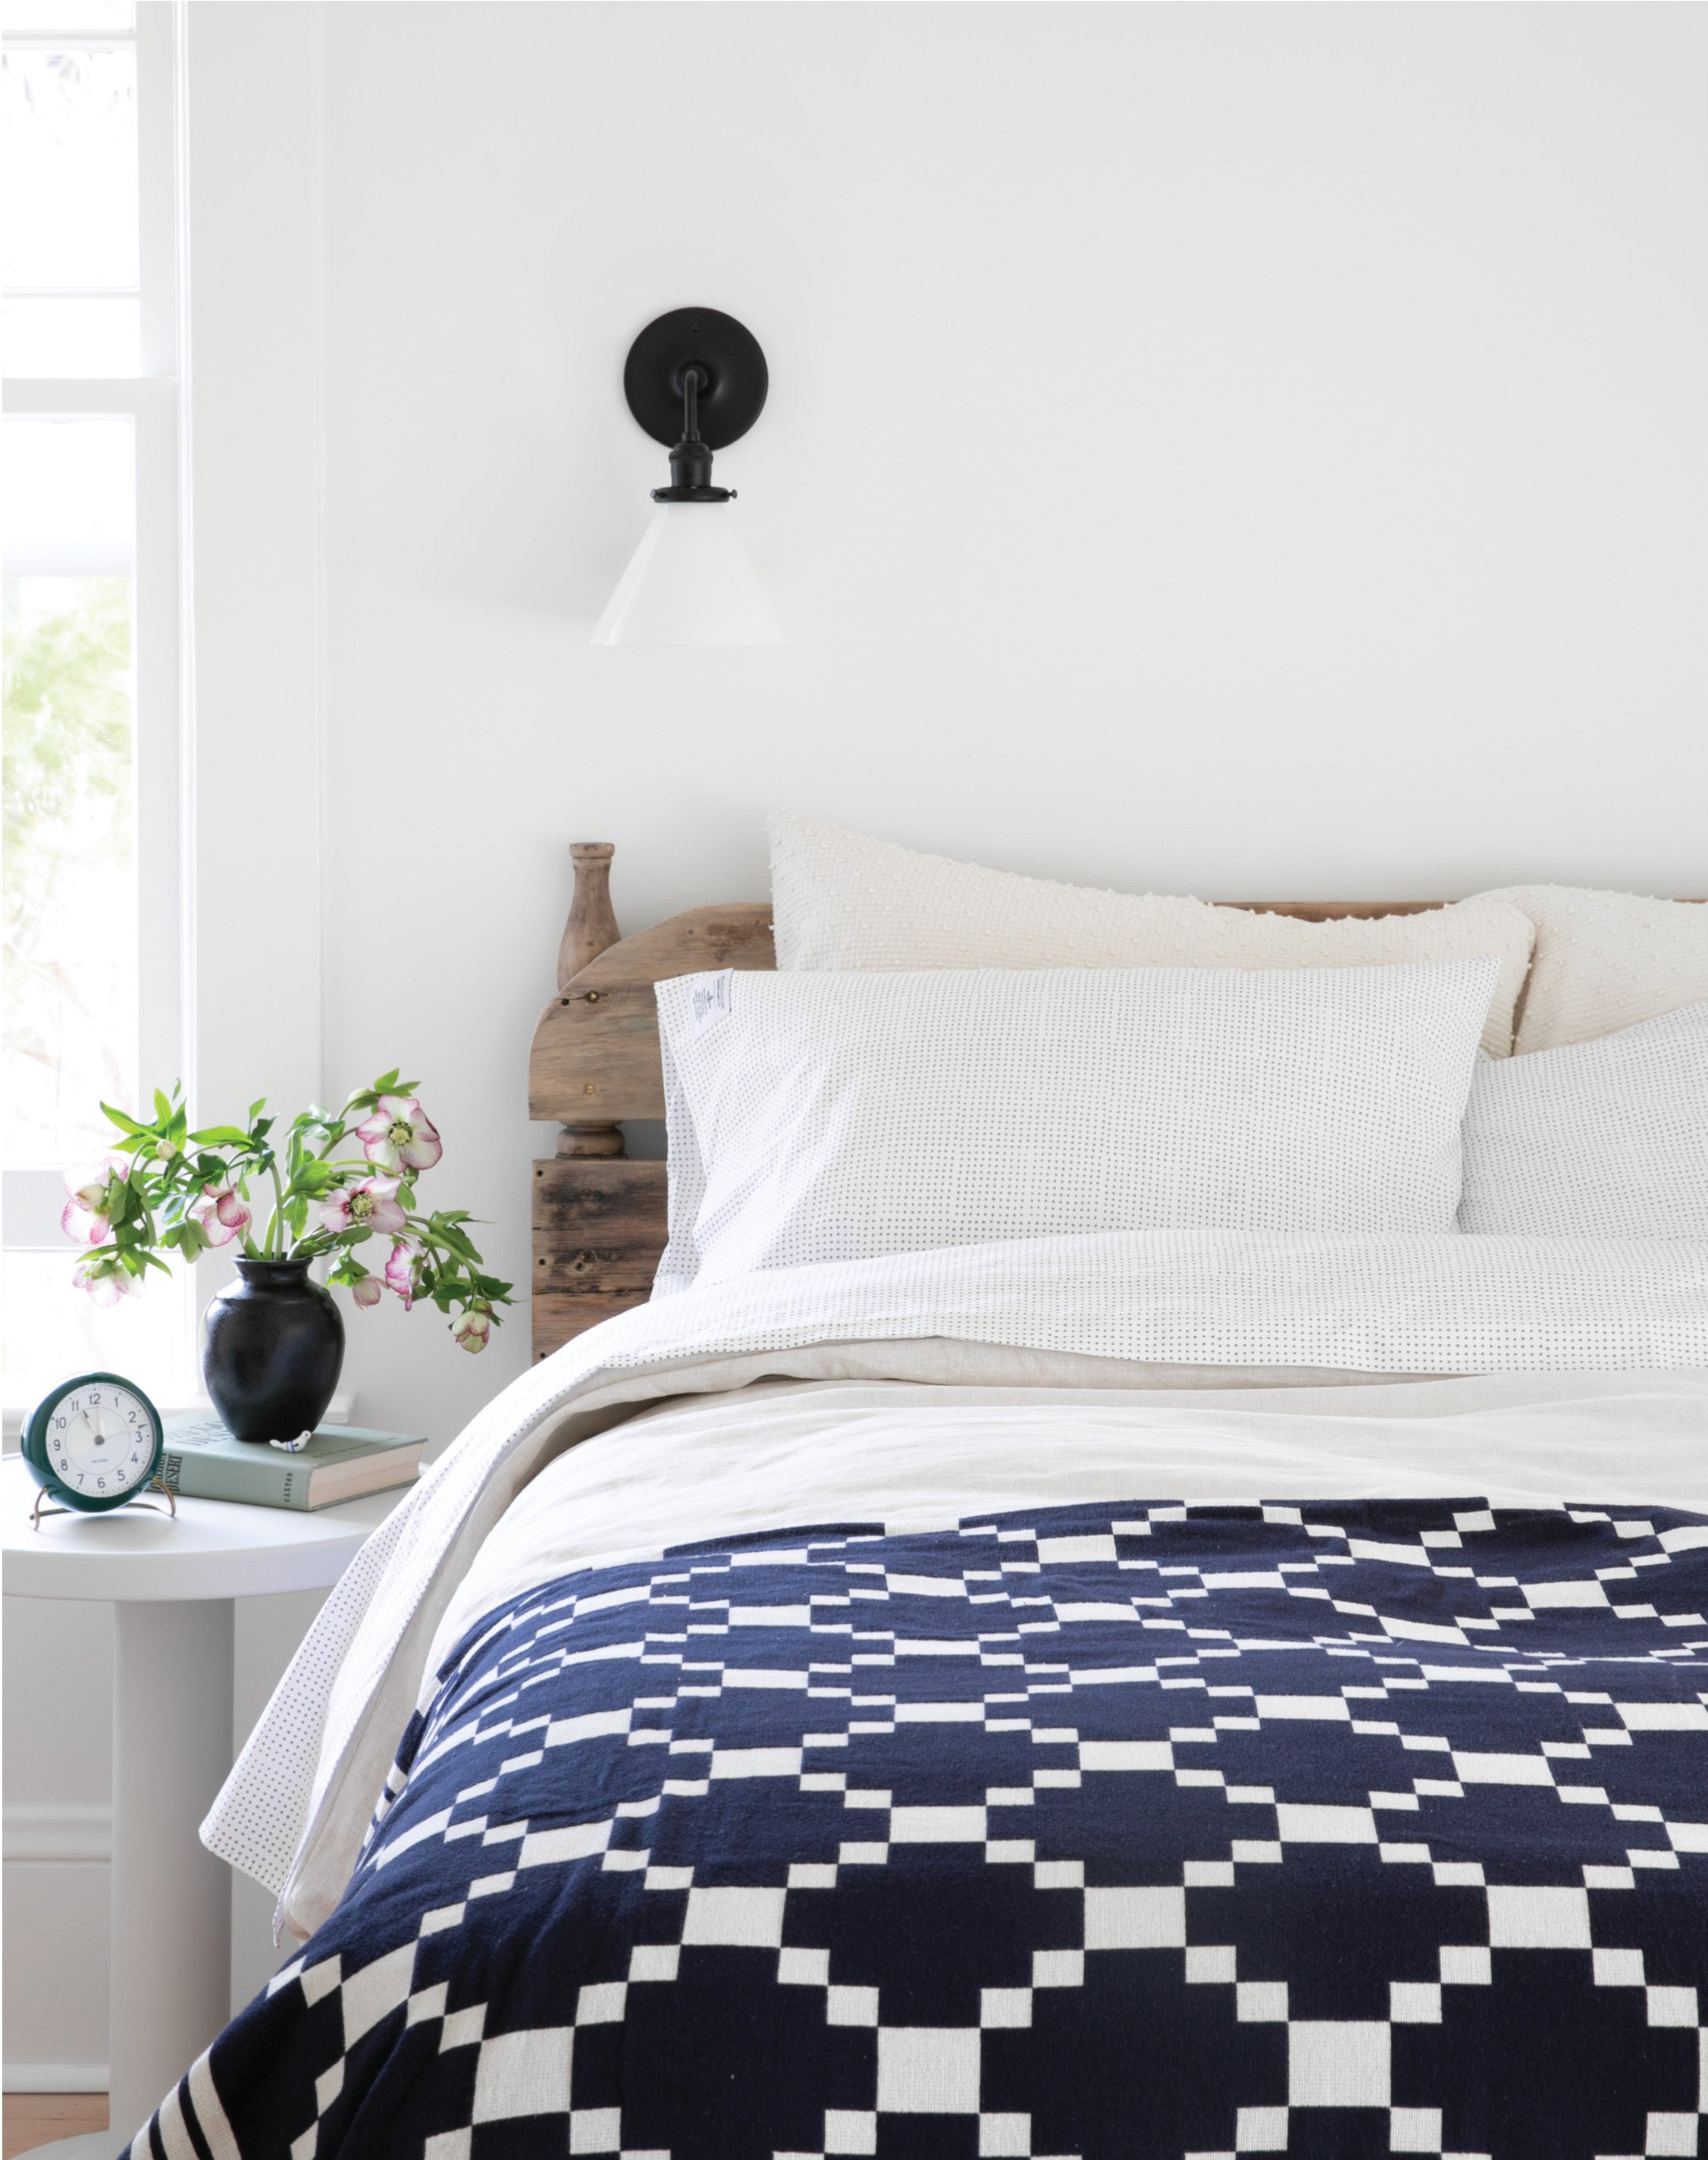 bed with a black and white checkered blanket and a black sconce